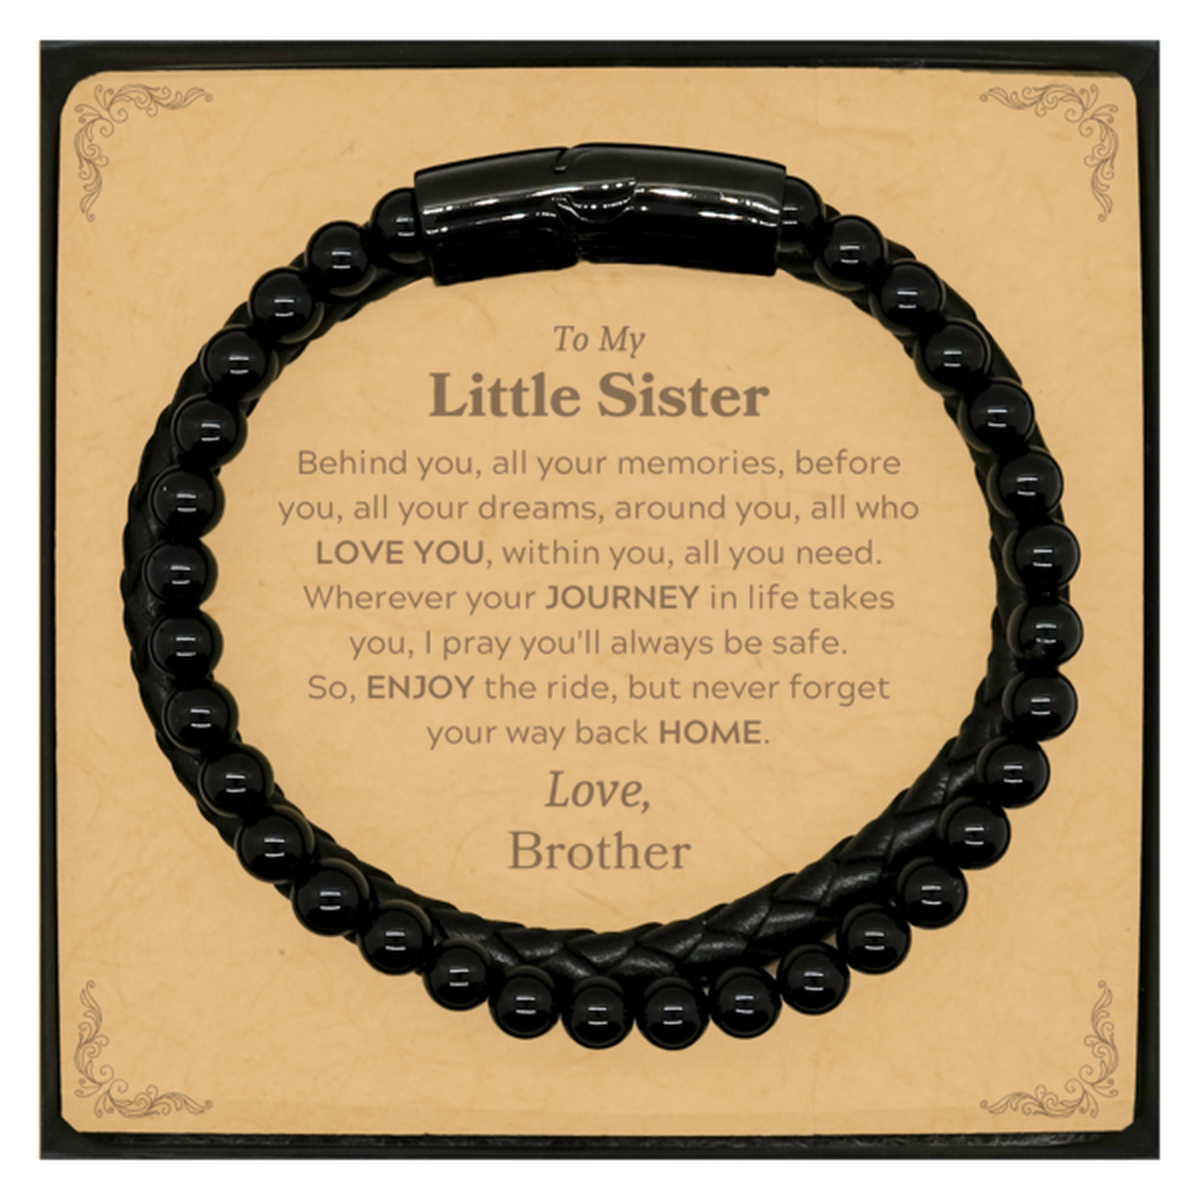 To My Little Sister Graduation Gifts from Brother, Little Sister Stone Leather Bracelets Christmas Birthday Gifts for Little Sister Behind you, all your memories, before you, all your dreams. Love, Brother